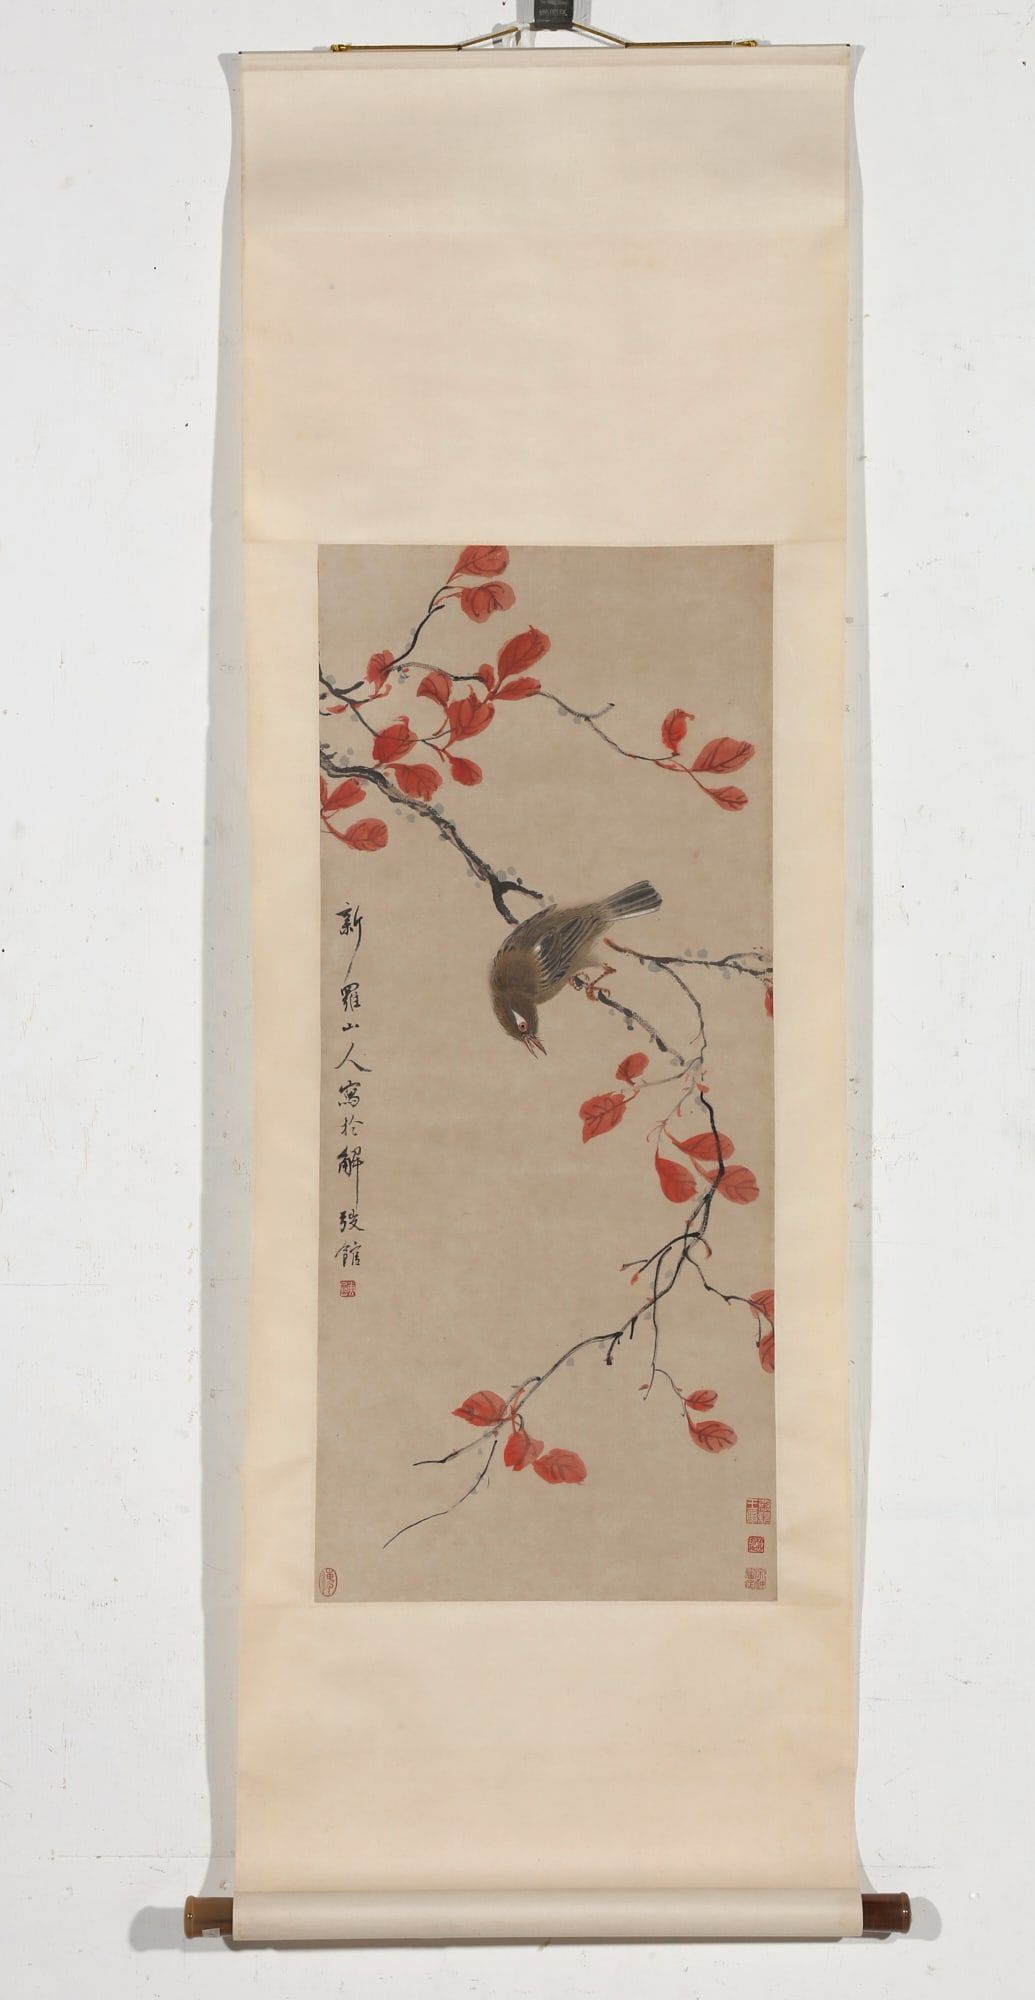 A CHINESE SCROLL DEPICTING A BIRD 2fb33e3